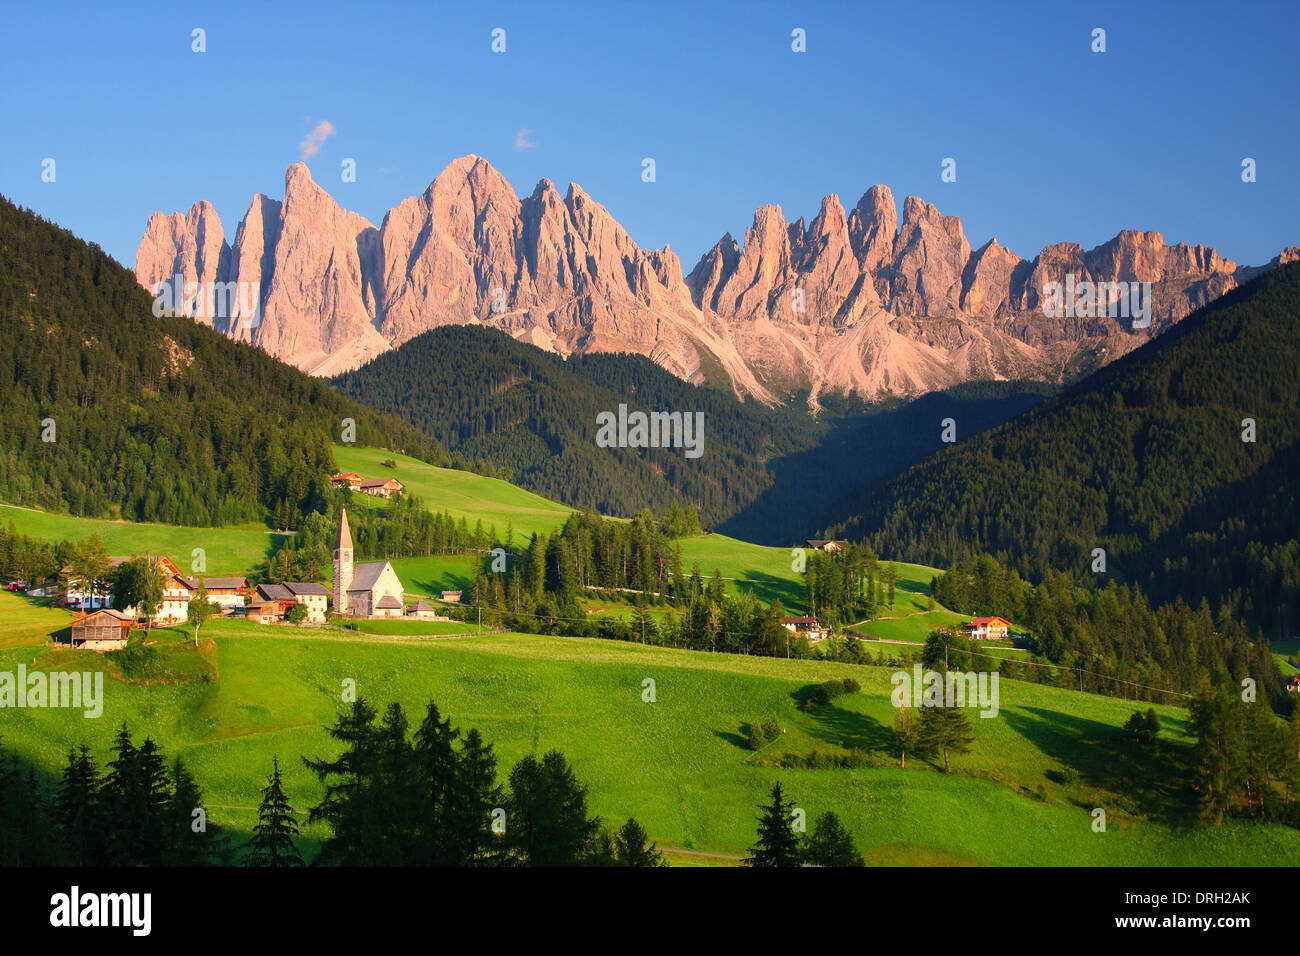 The Dolomites in northern Italy Stock Photo - Alamy